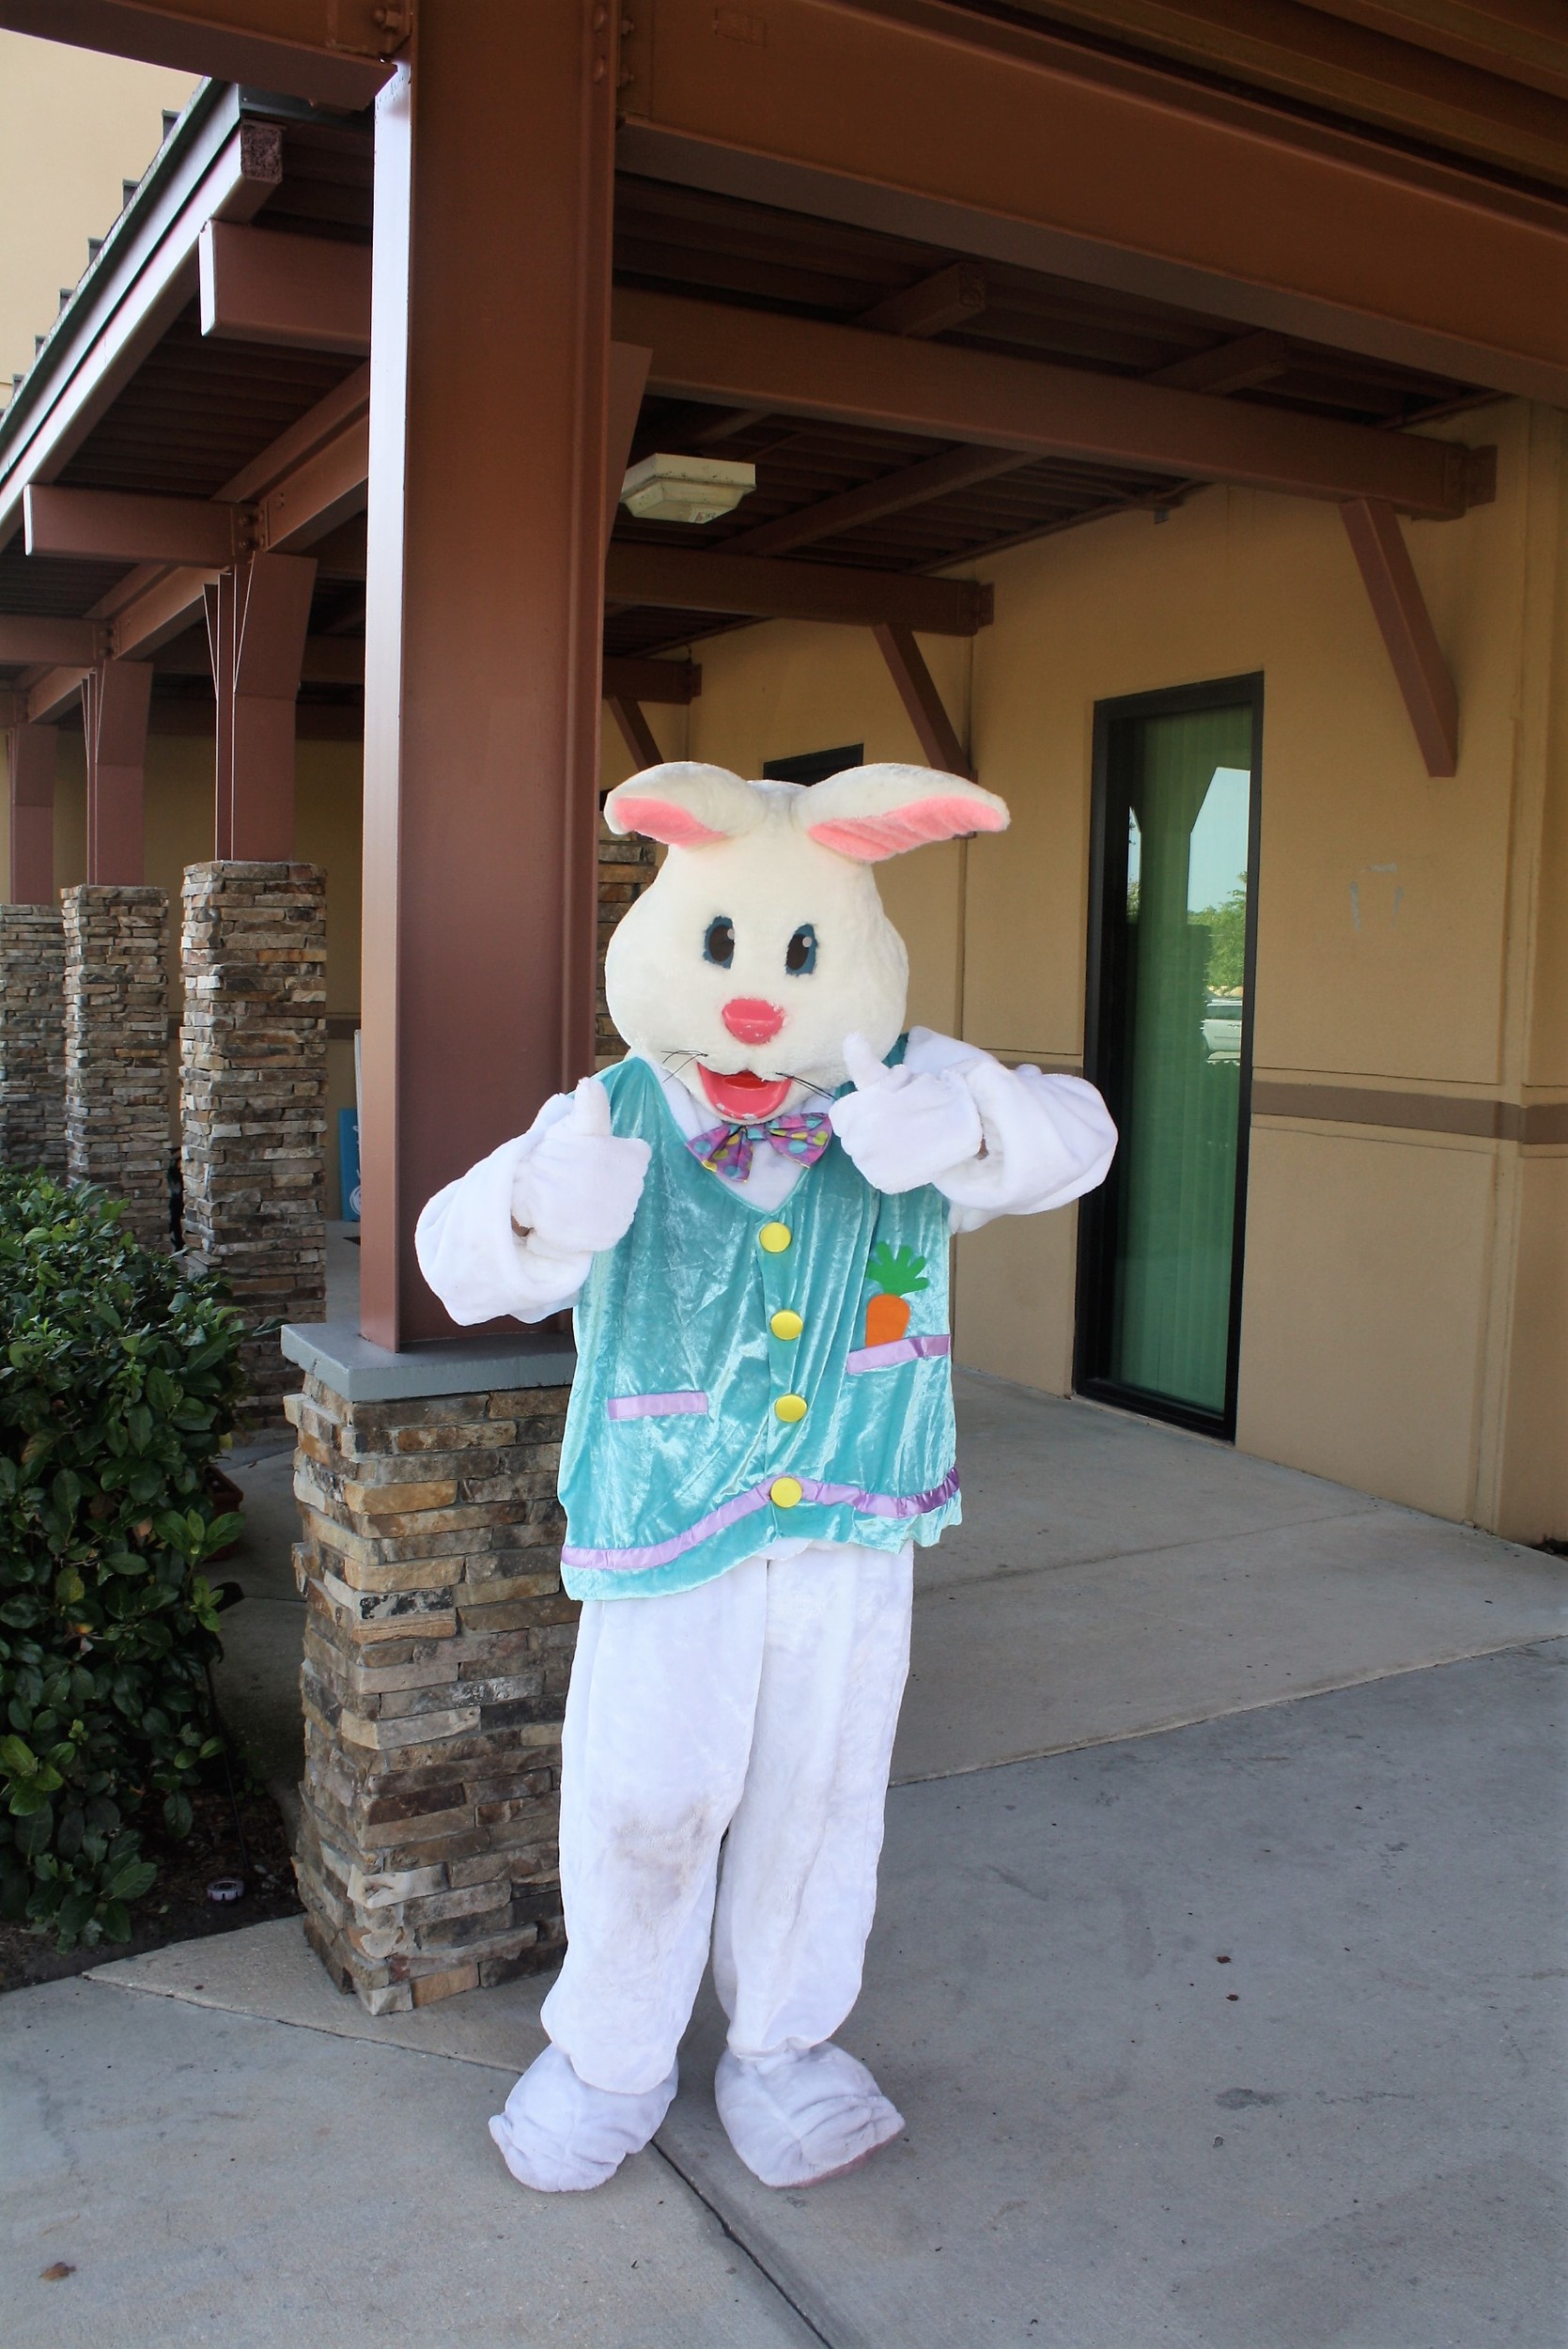 The Easter Bunny welcomes children to Crosswater Community Church's Easter egg hunt